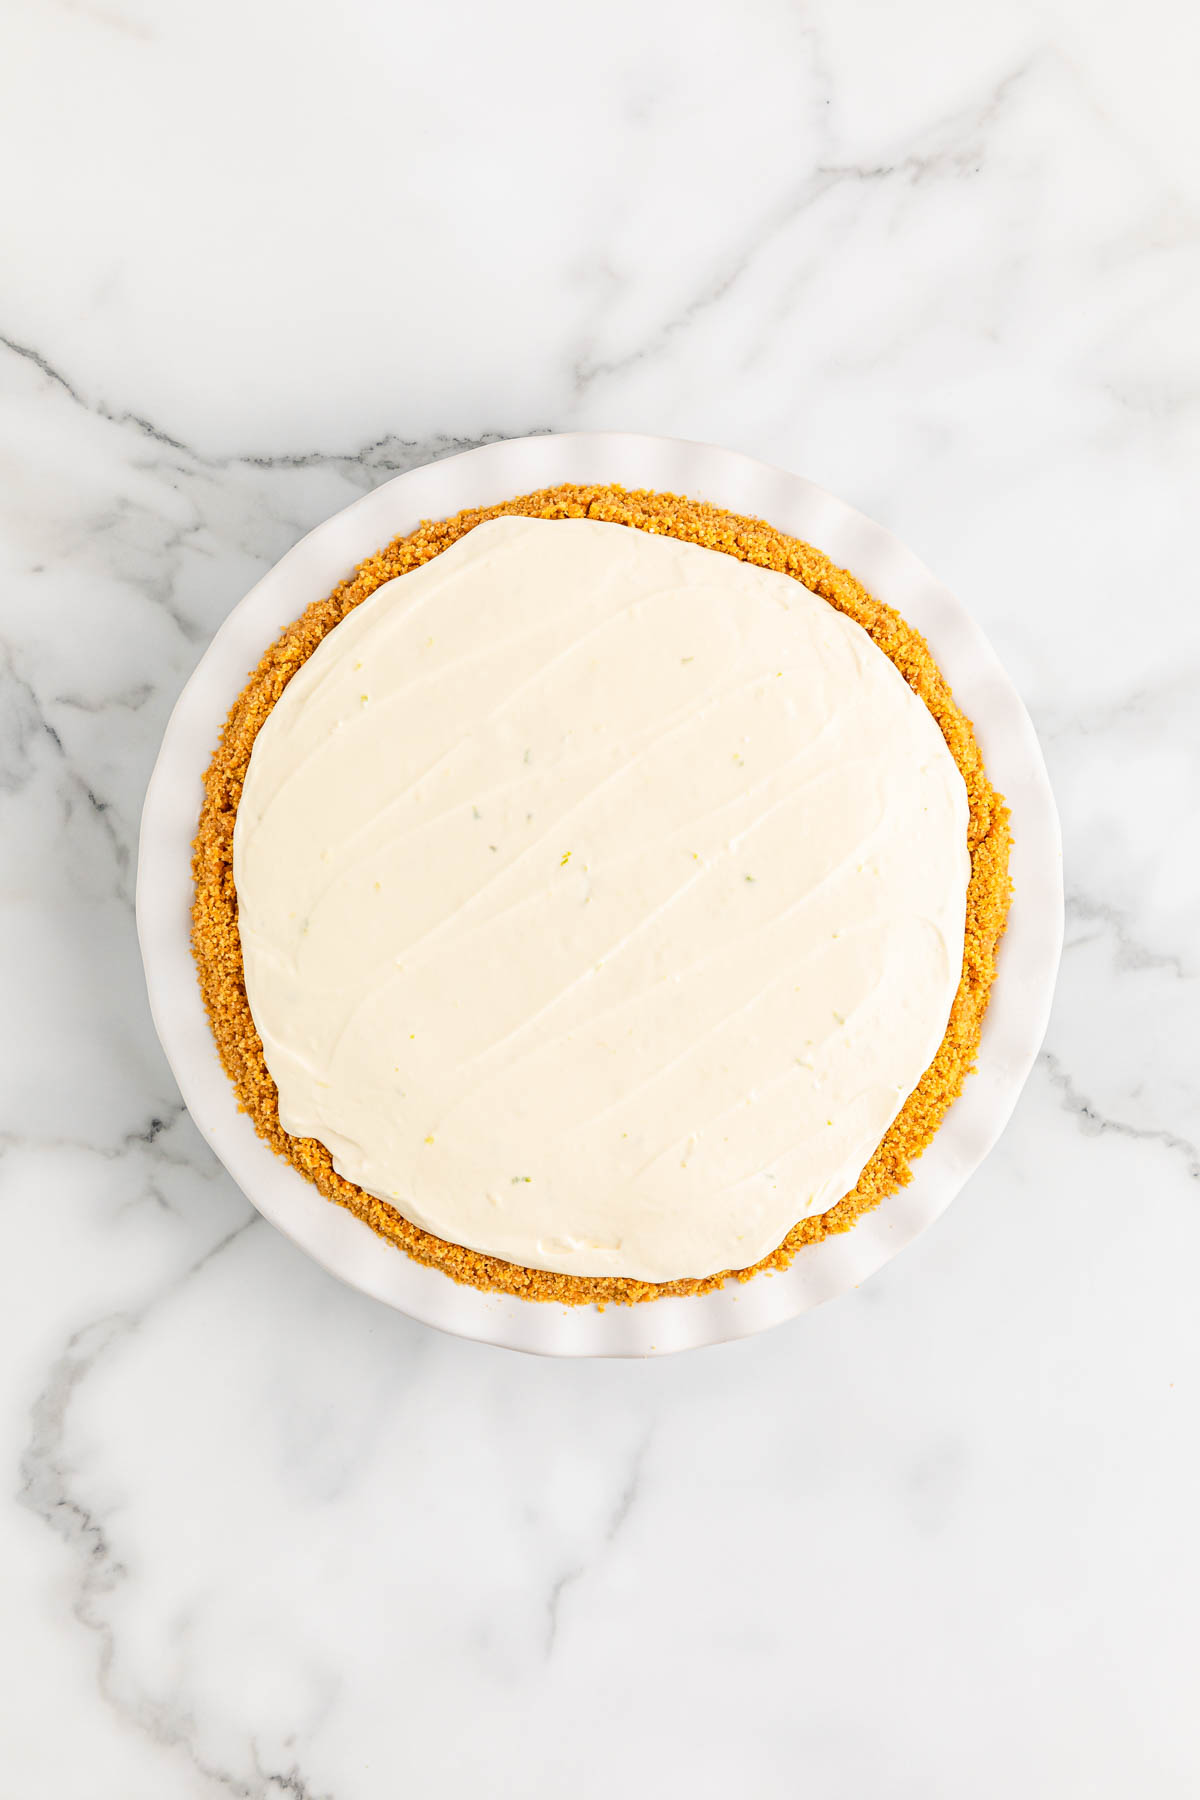 Key lime pie in a white pie dish